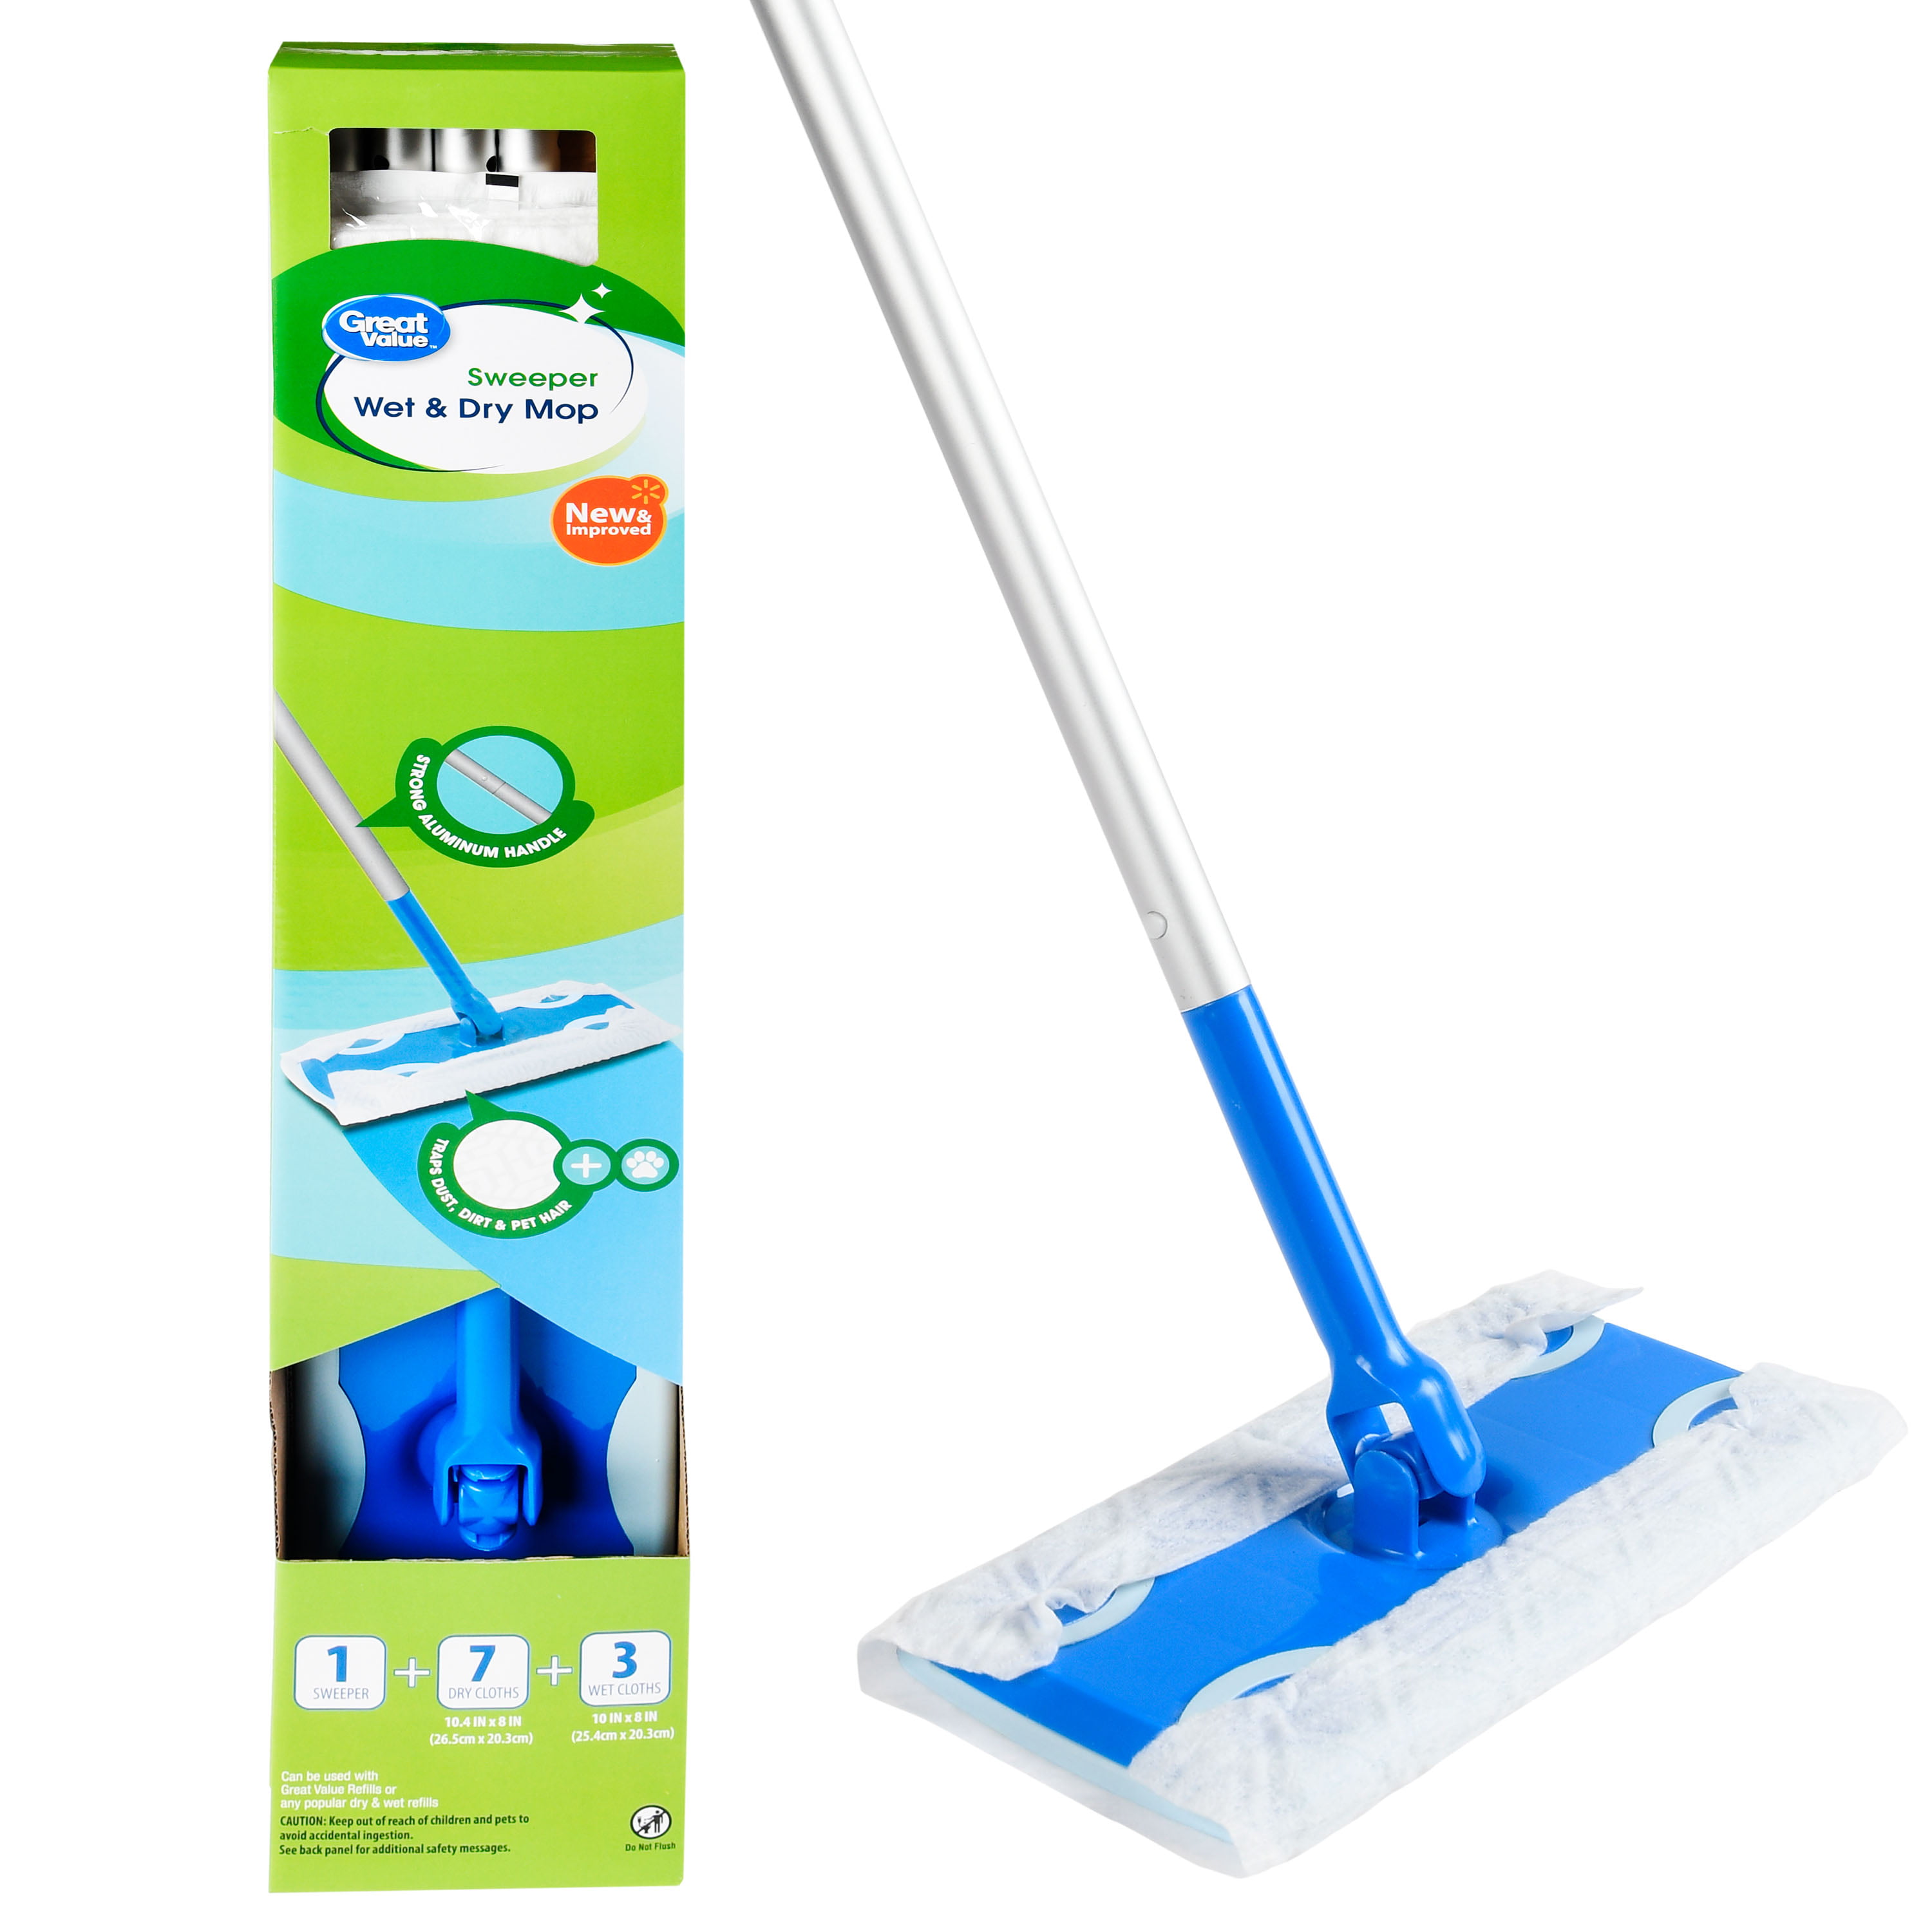 option of additional Spray-Fix Refill Osmo Spray Mop 5 litre Drum & Mop Head 